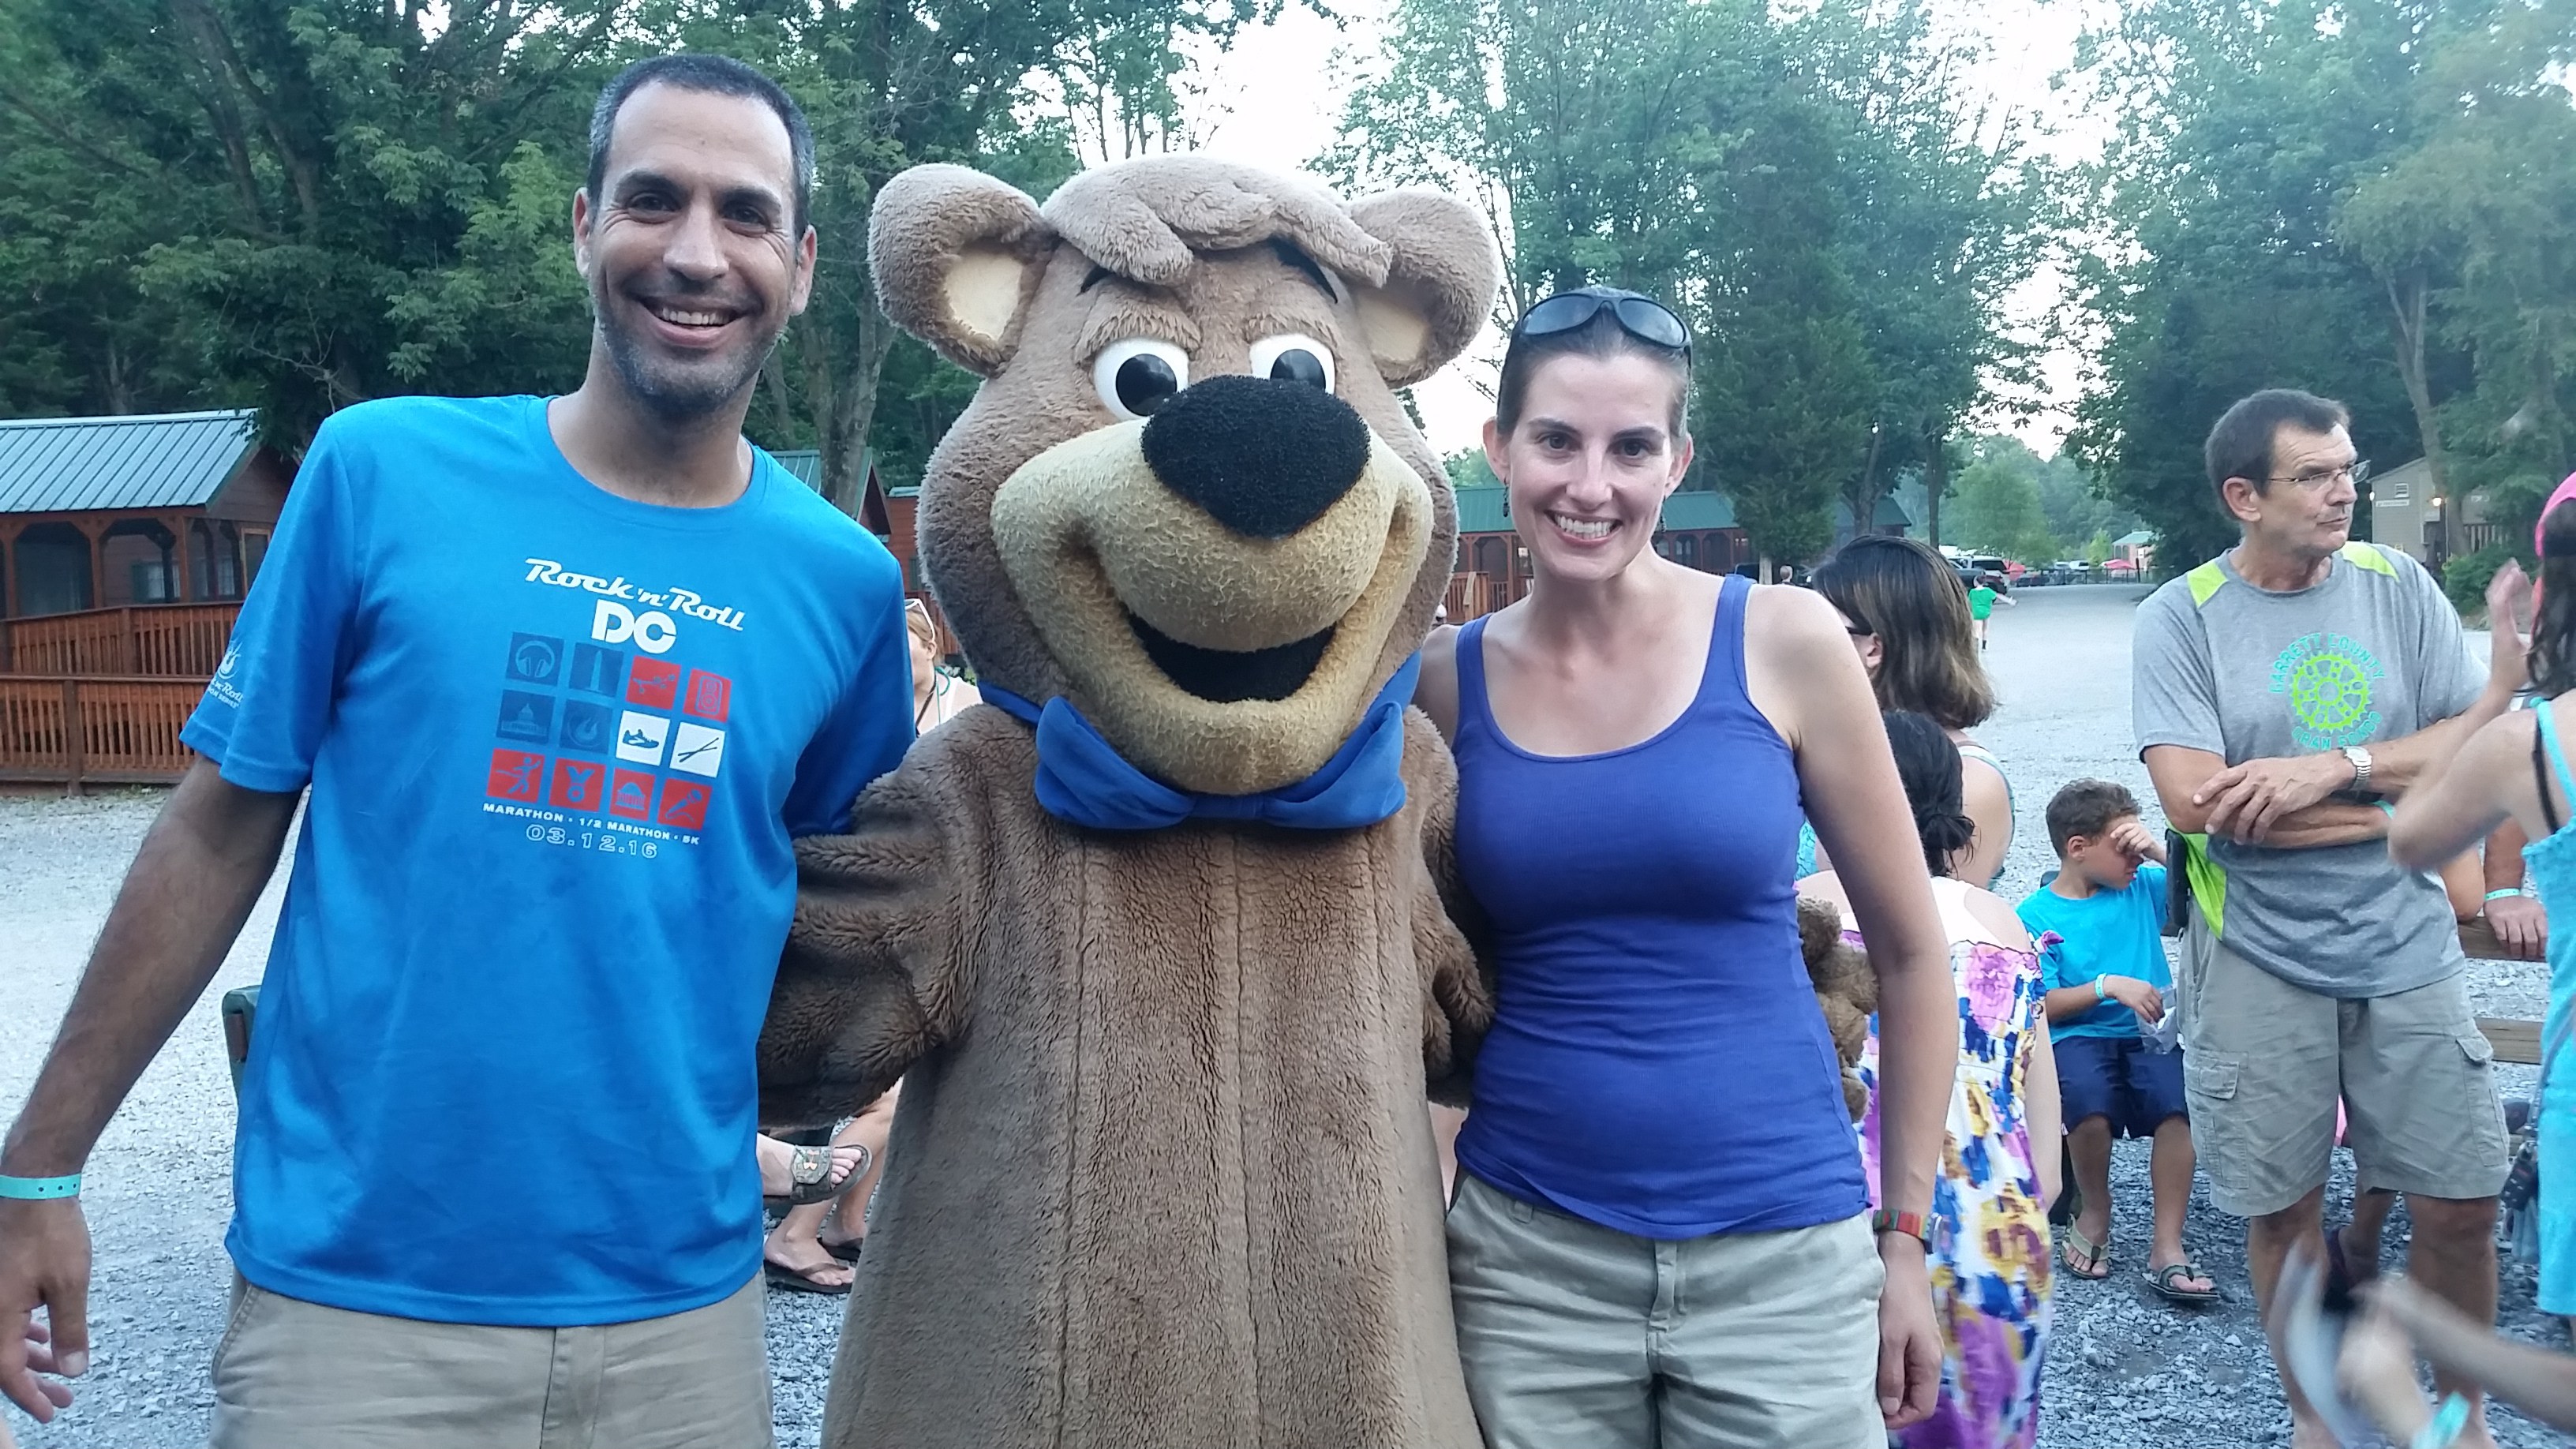 Alan and Lindy posing with person in Yogi Bear costume.